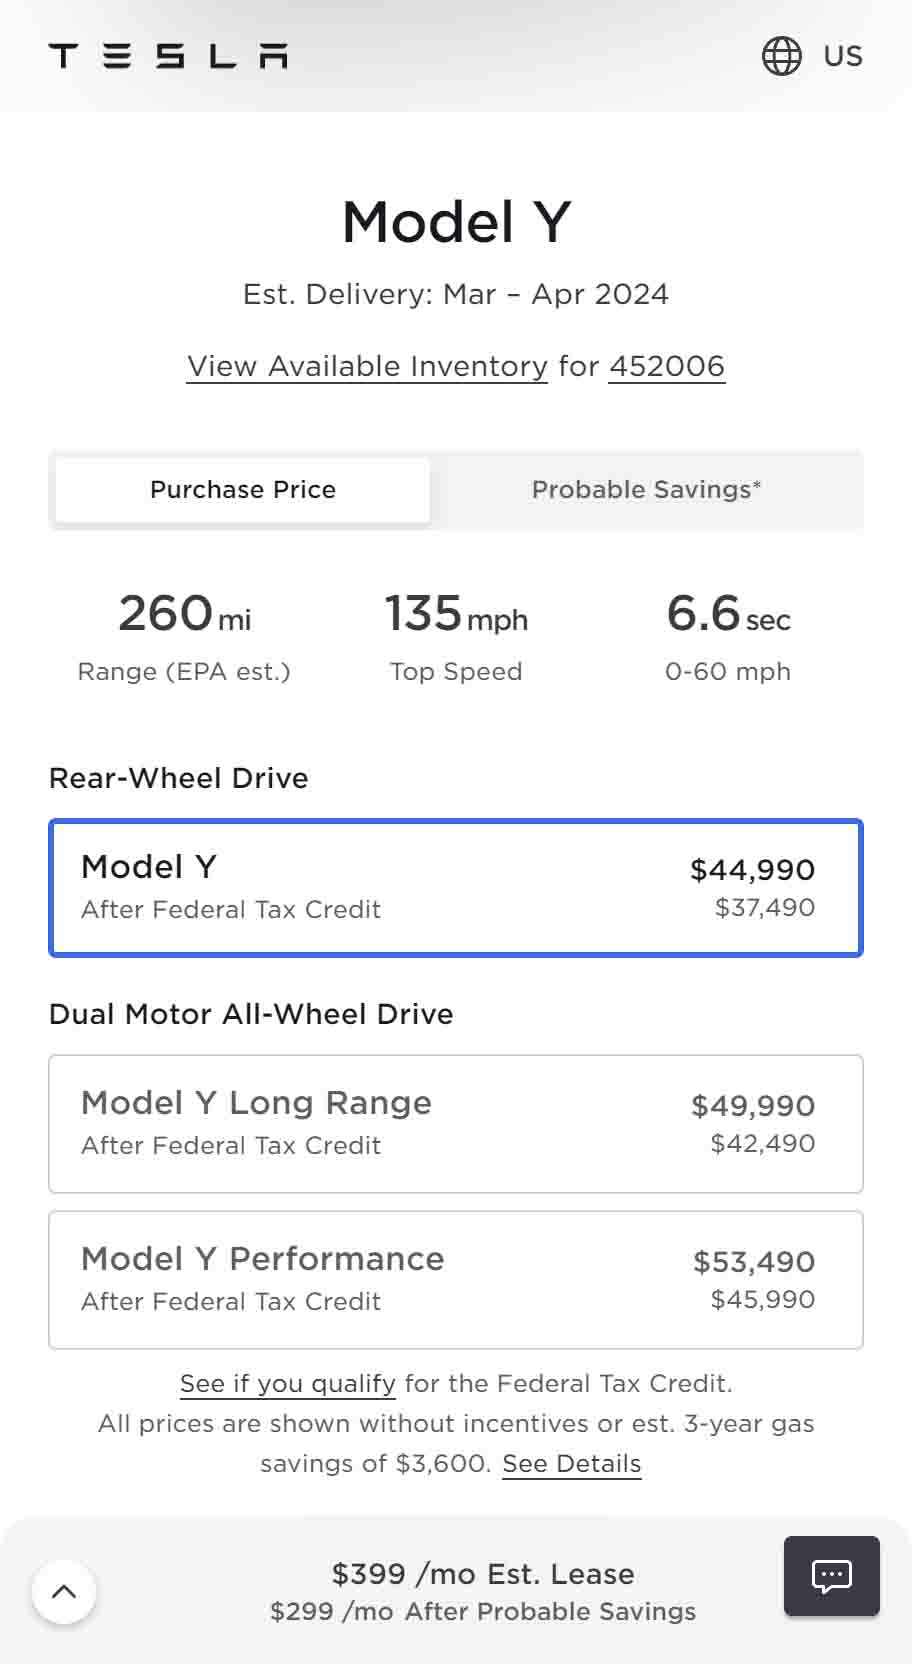 Tesla Model Y added $1000 Price increase on all variants by April 1, 2024 